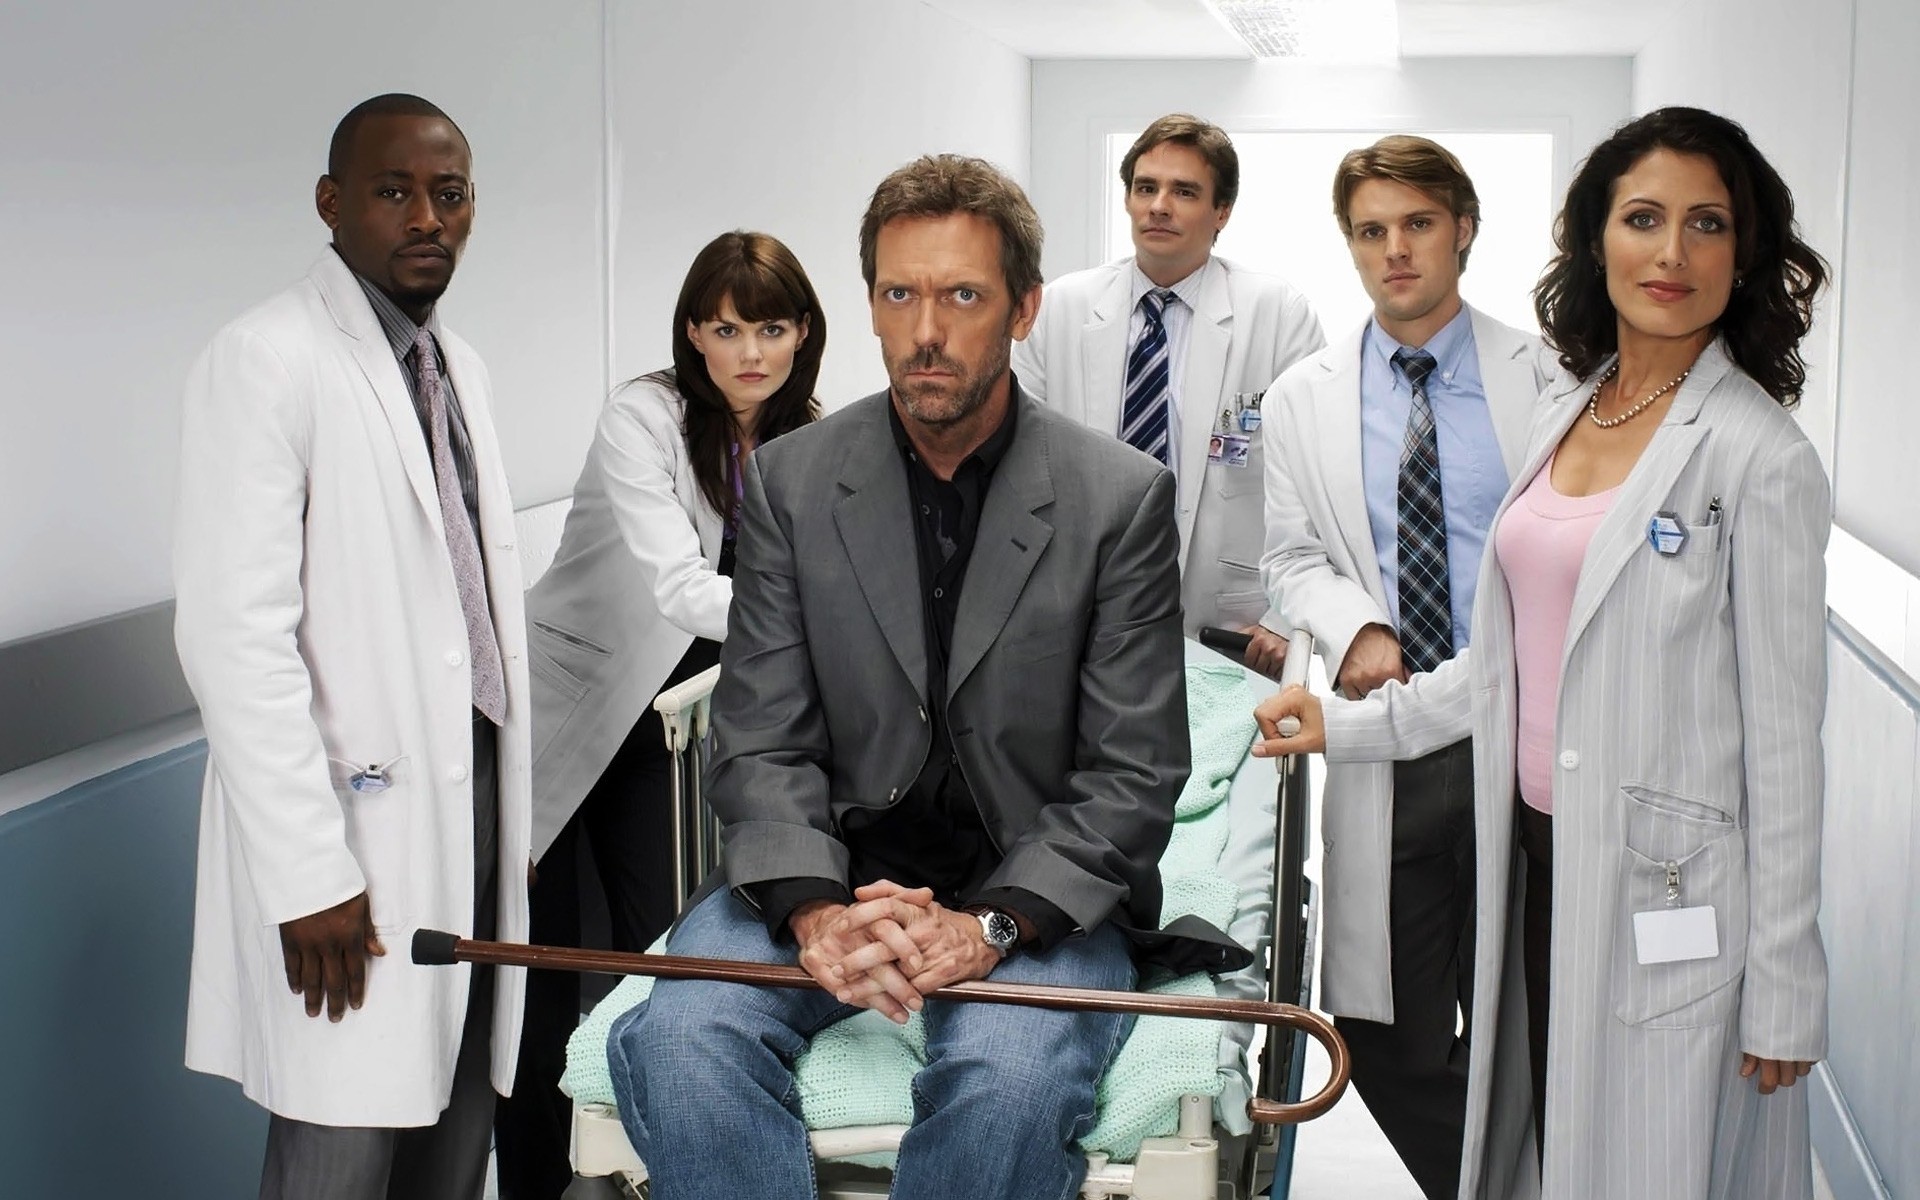 tv series healthcare woman adult indoors man hospital medicine business teamwork group facial expression cooperation